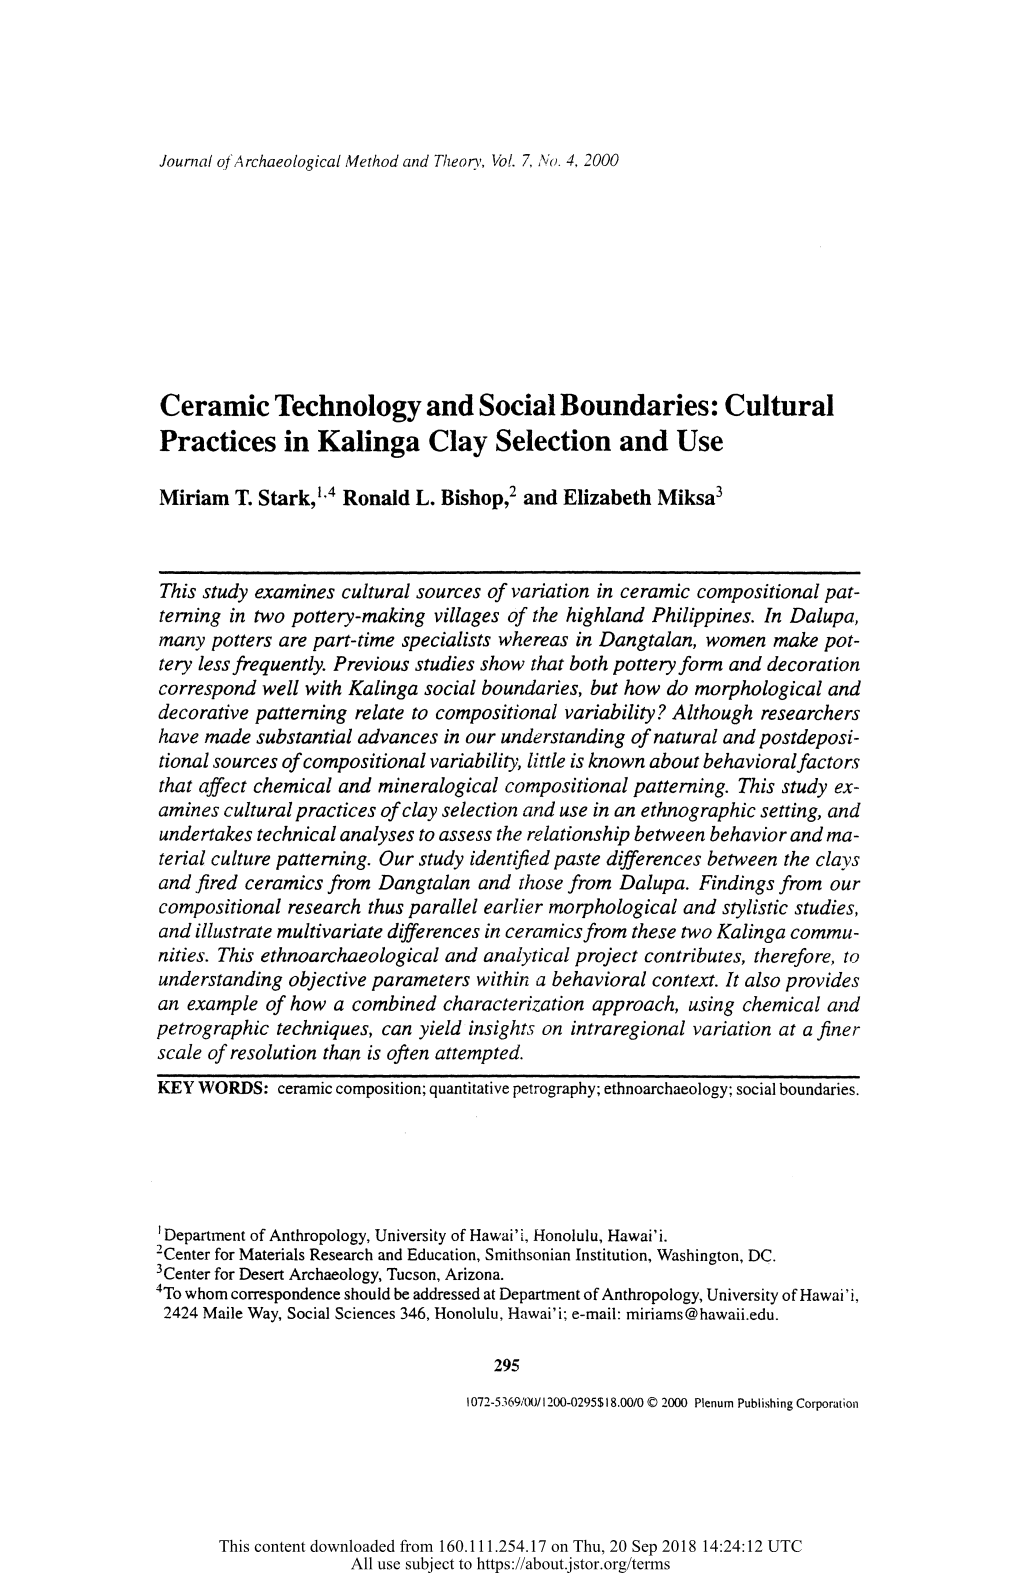 Cultural Practices in Kalinga Clay Selection and Use